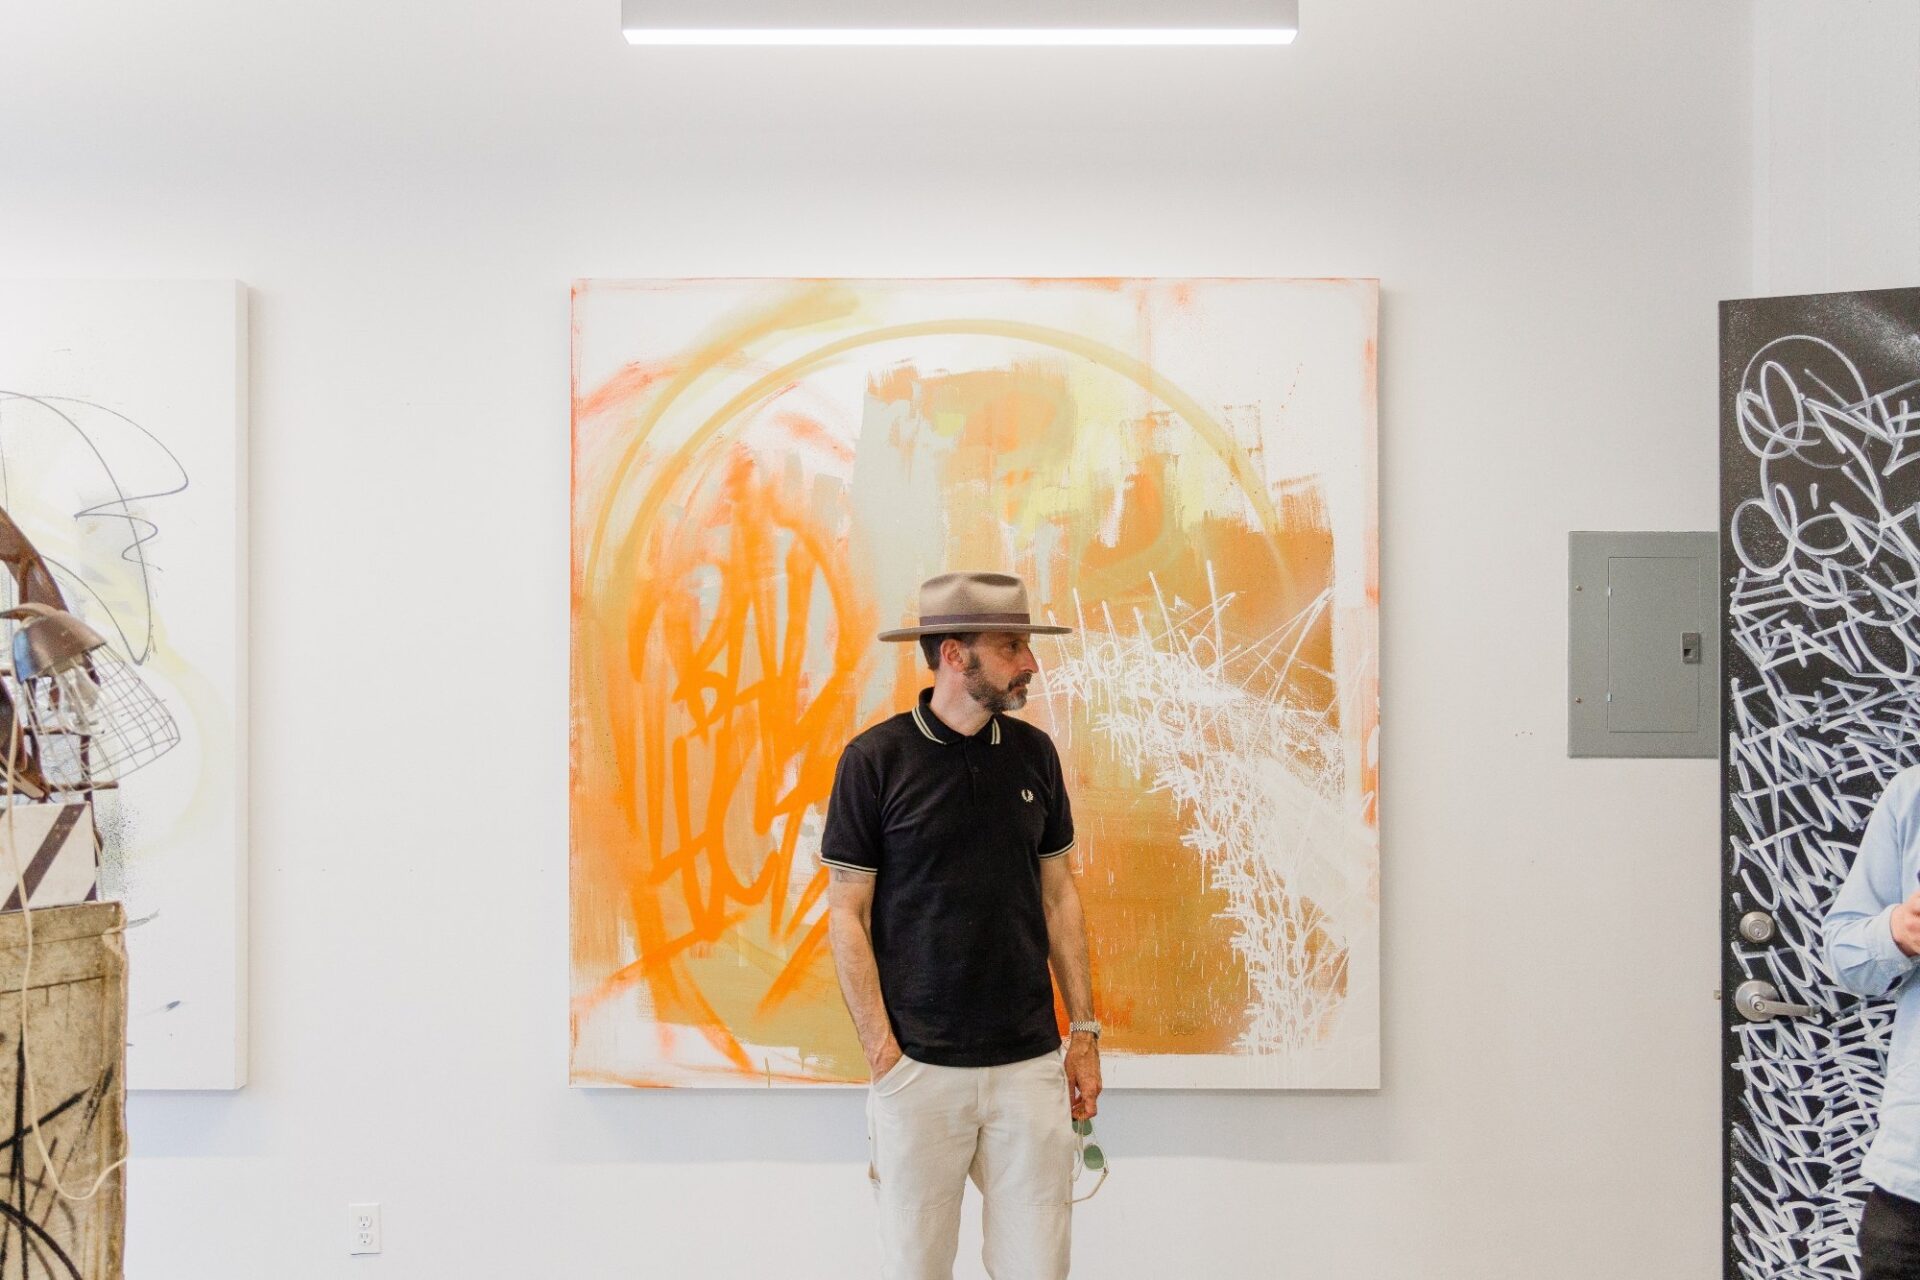 Someone is standing in front of an orange painting.